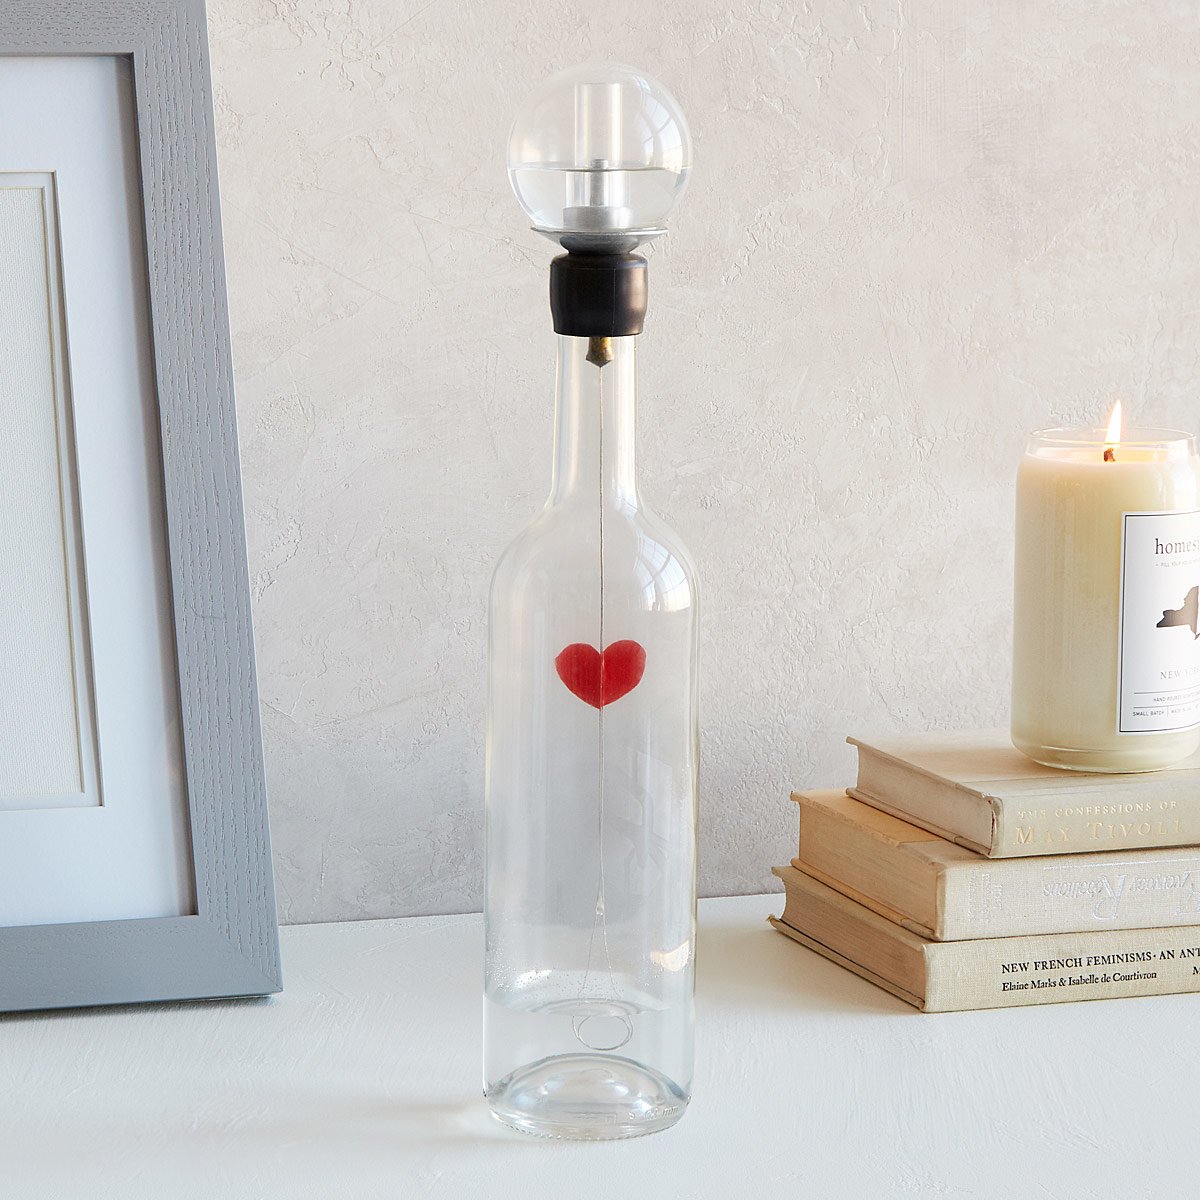 Beating Heart in a Bottle Sculpture | UncommonGoods